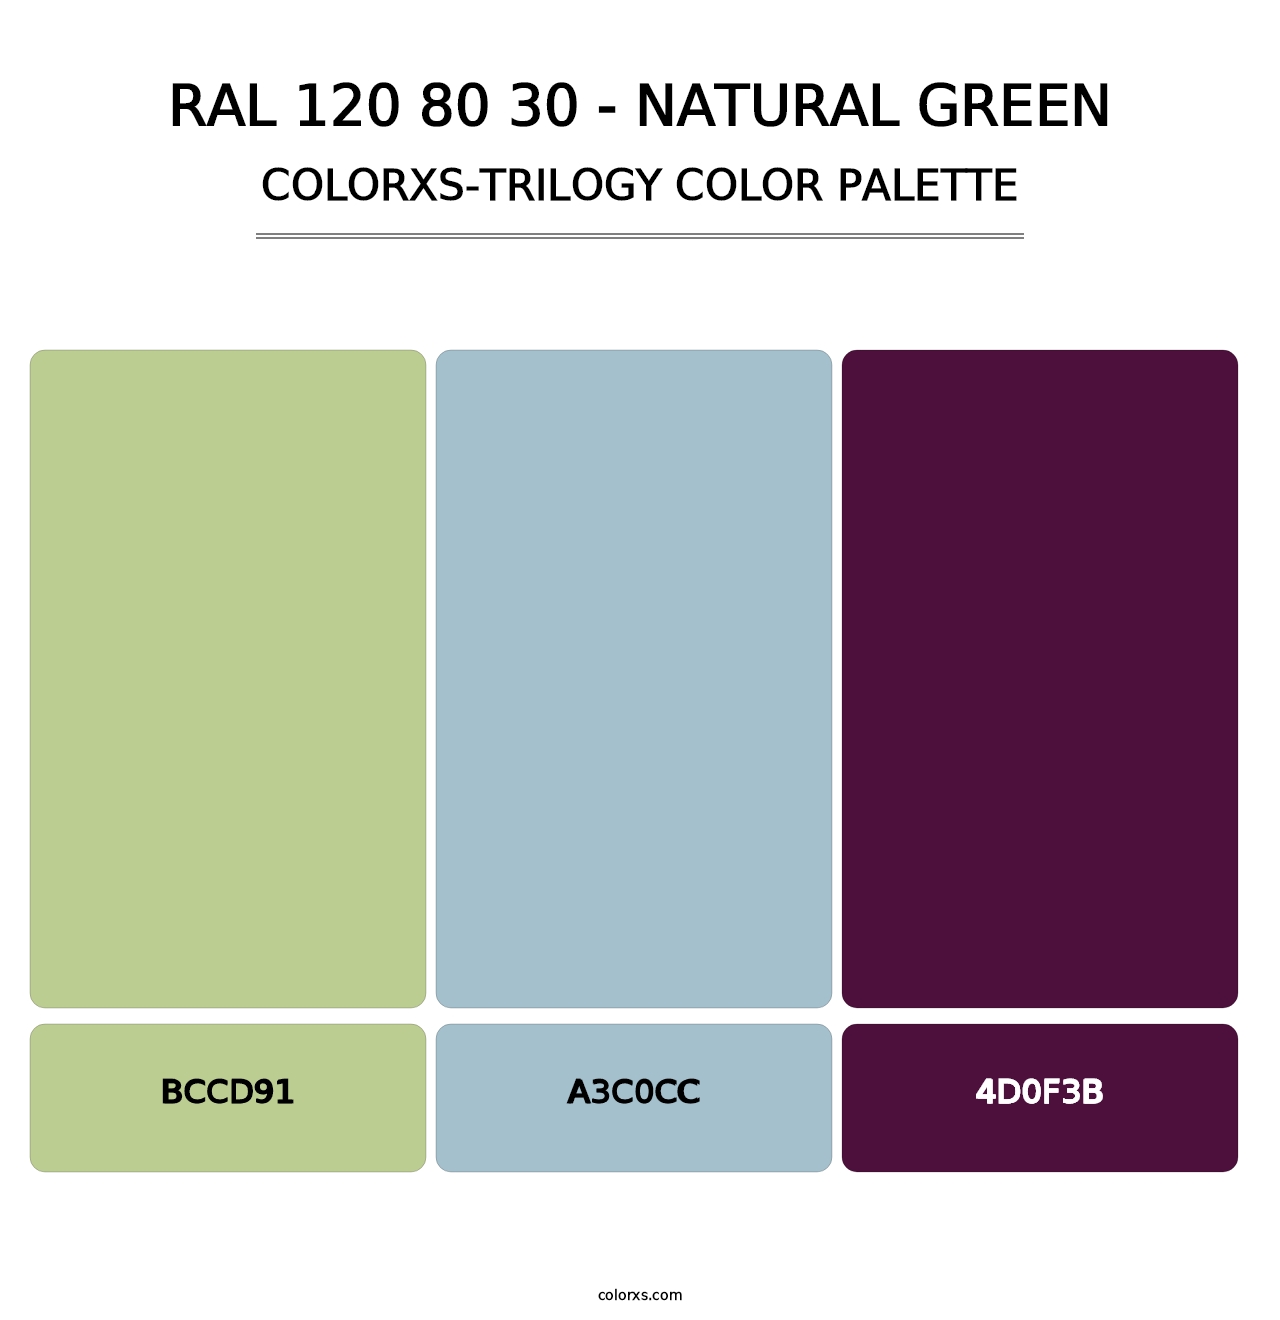 RAL 120 80 30 - Natural Green - Colorxs Trilogy Palette